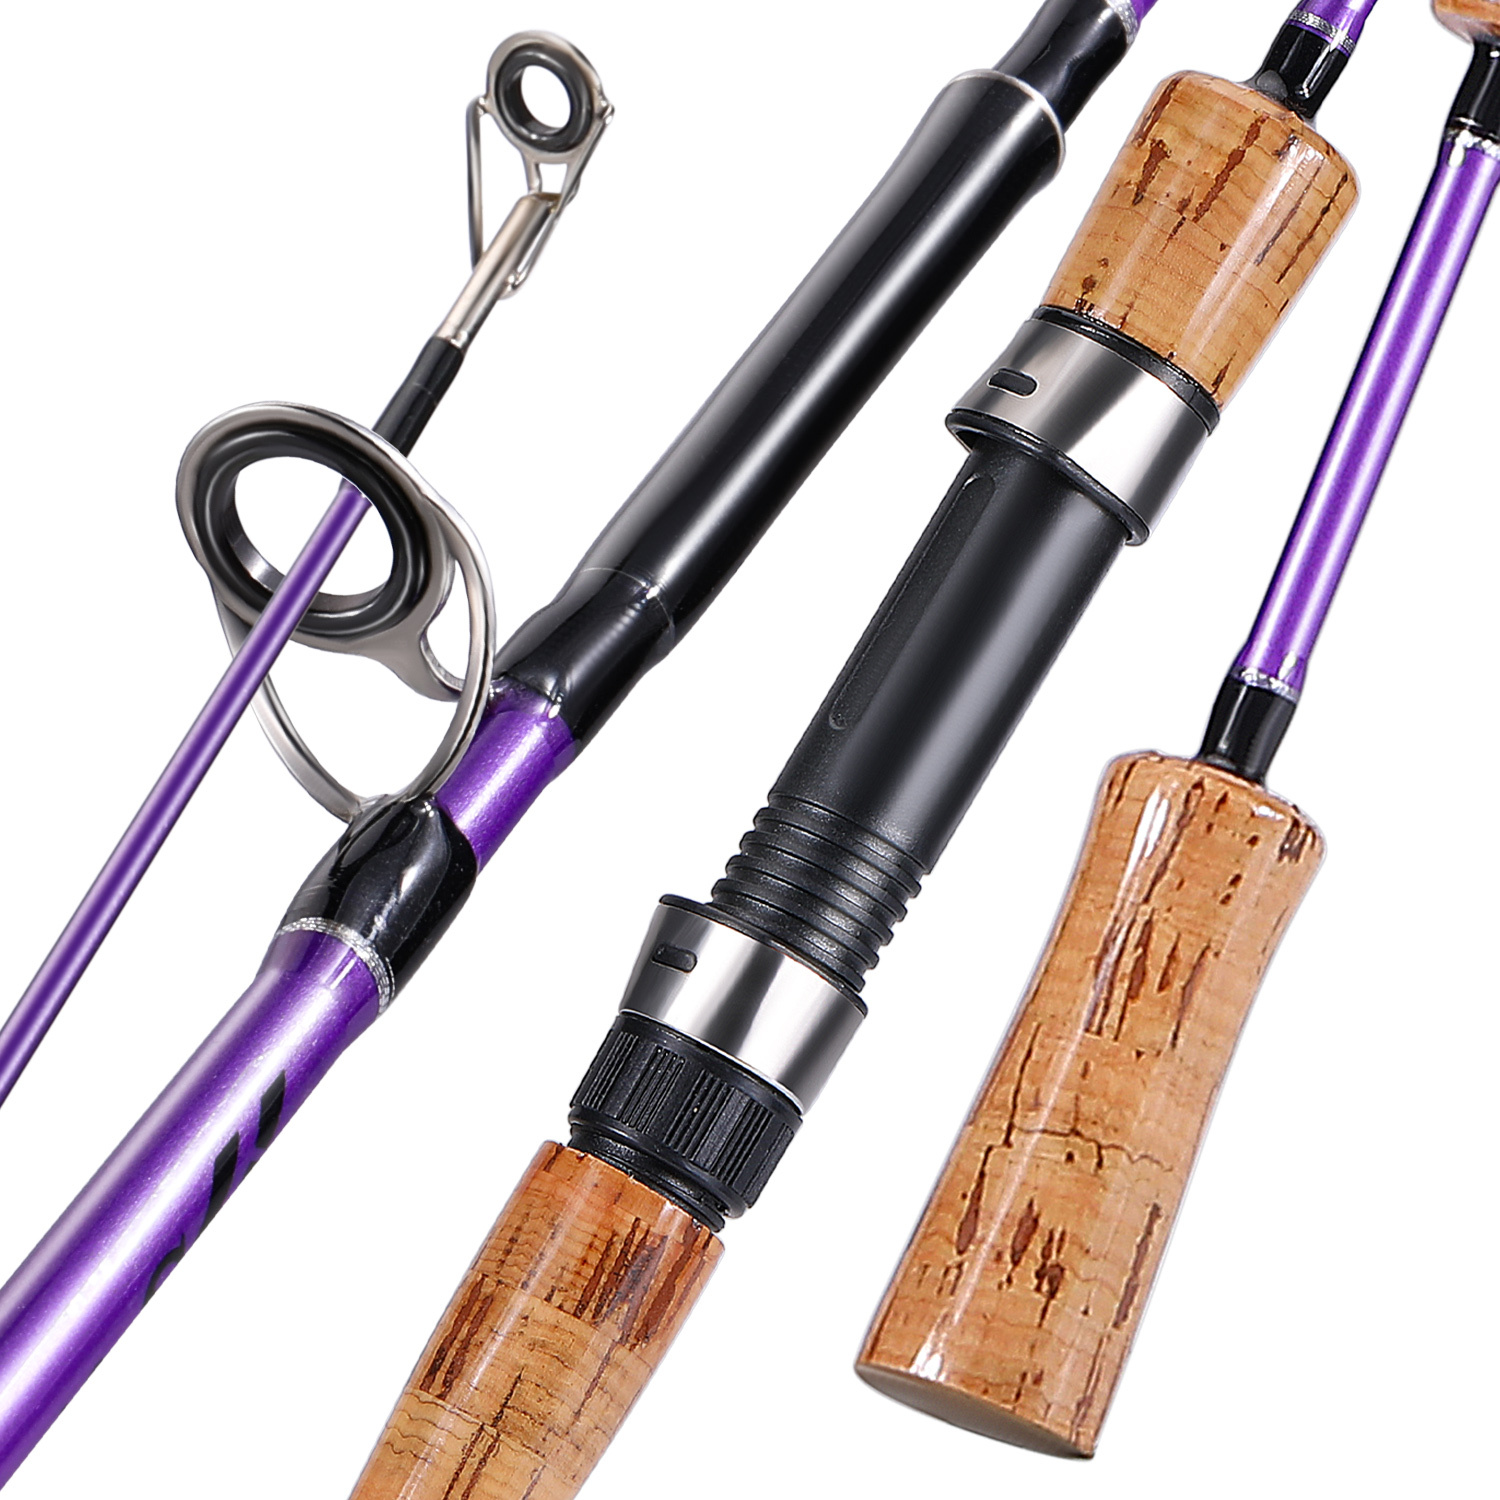 Sougayilang Resolute Fishing Rods, Spinning Rods & Casting Rods